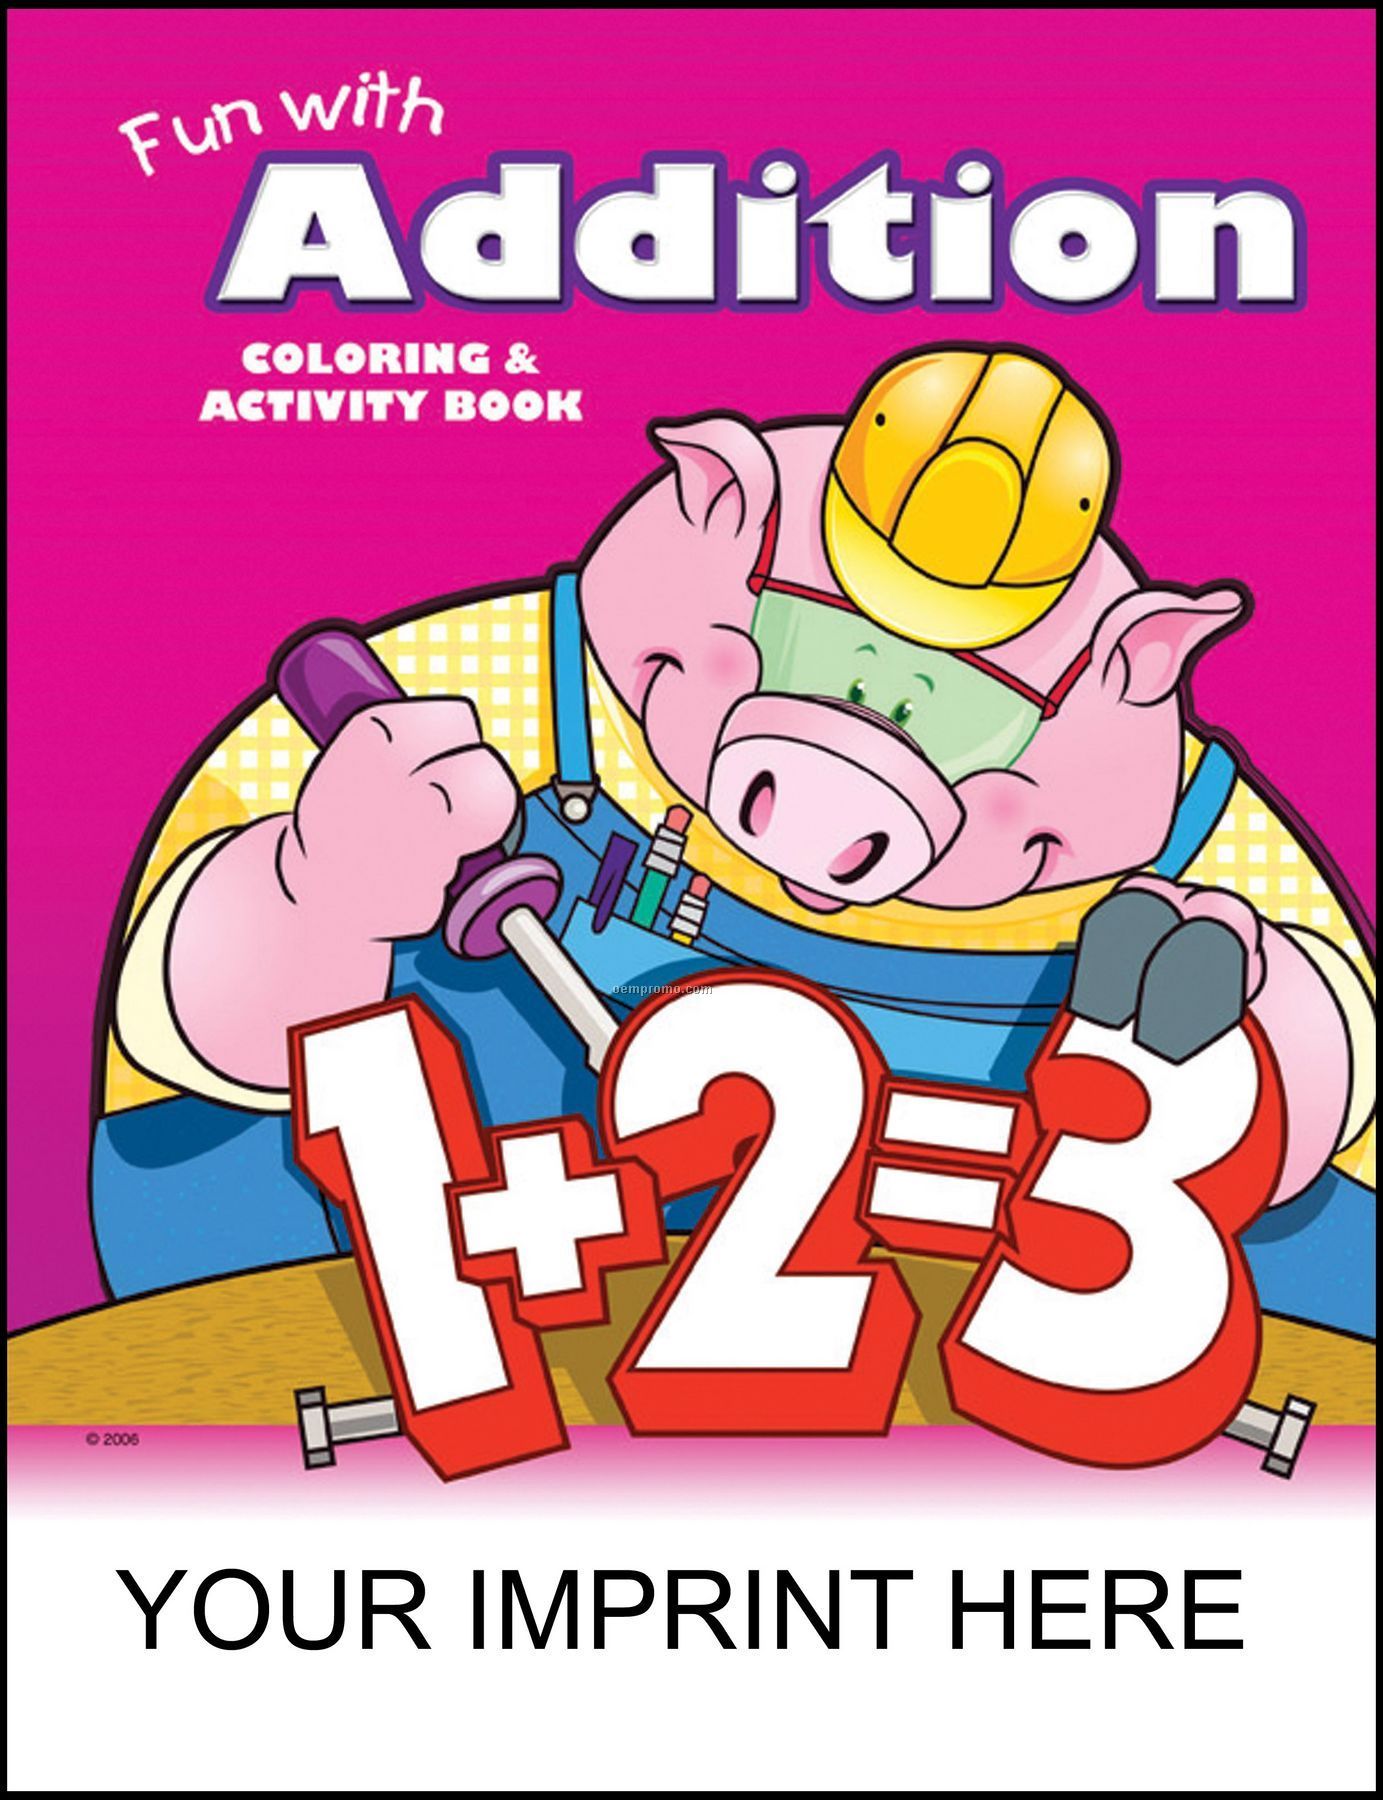 Fun With Addition Coloring & Activity Book